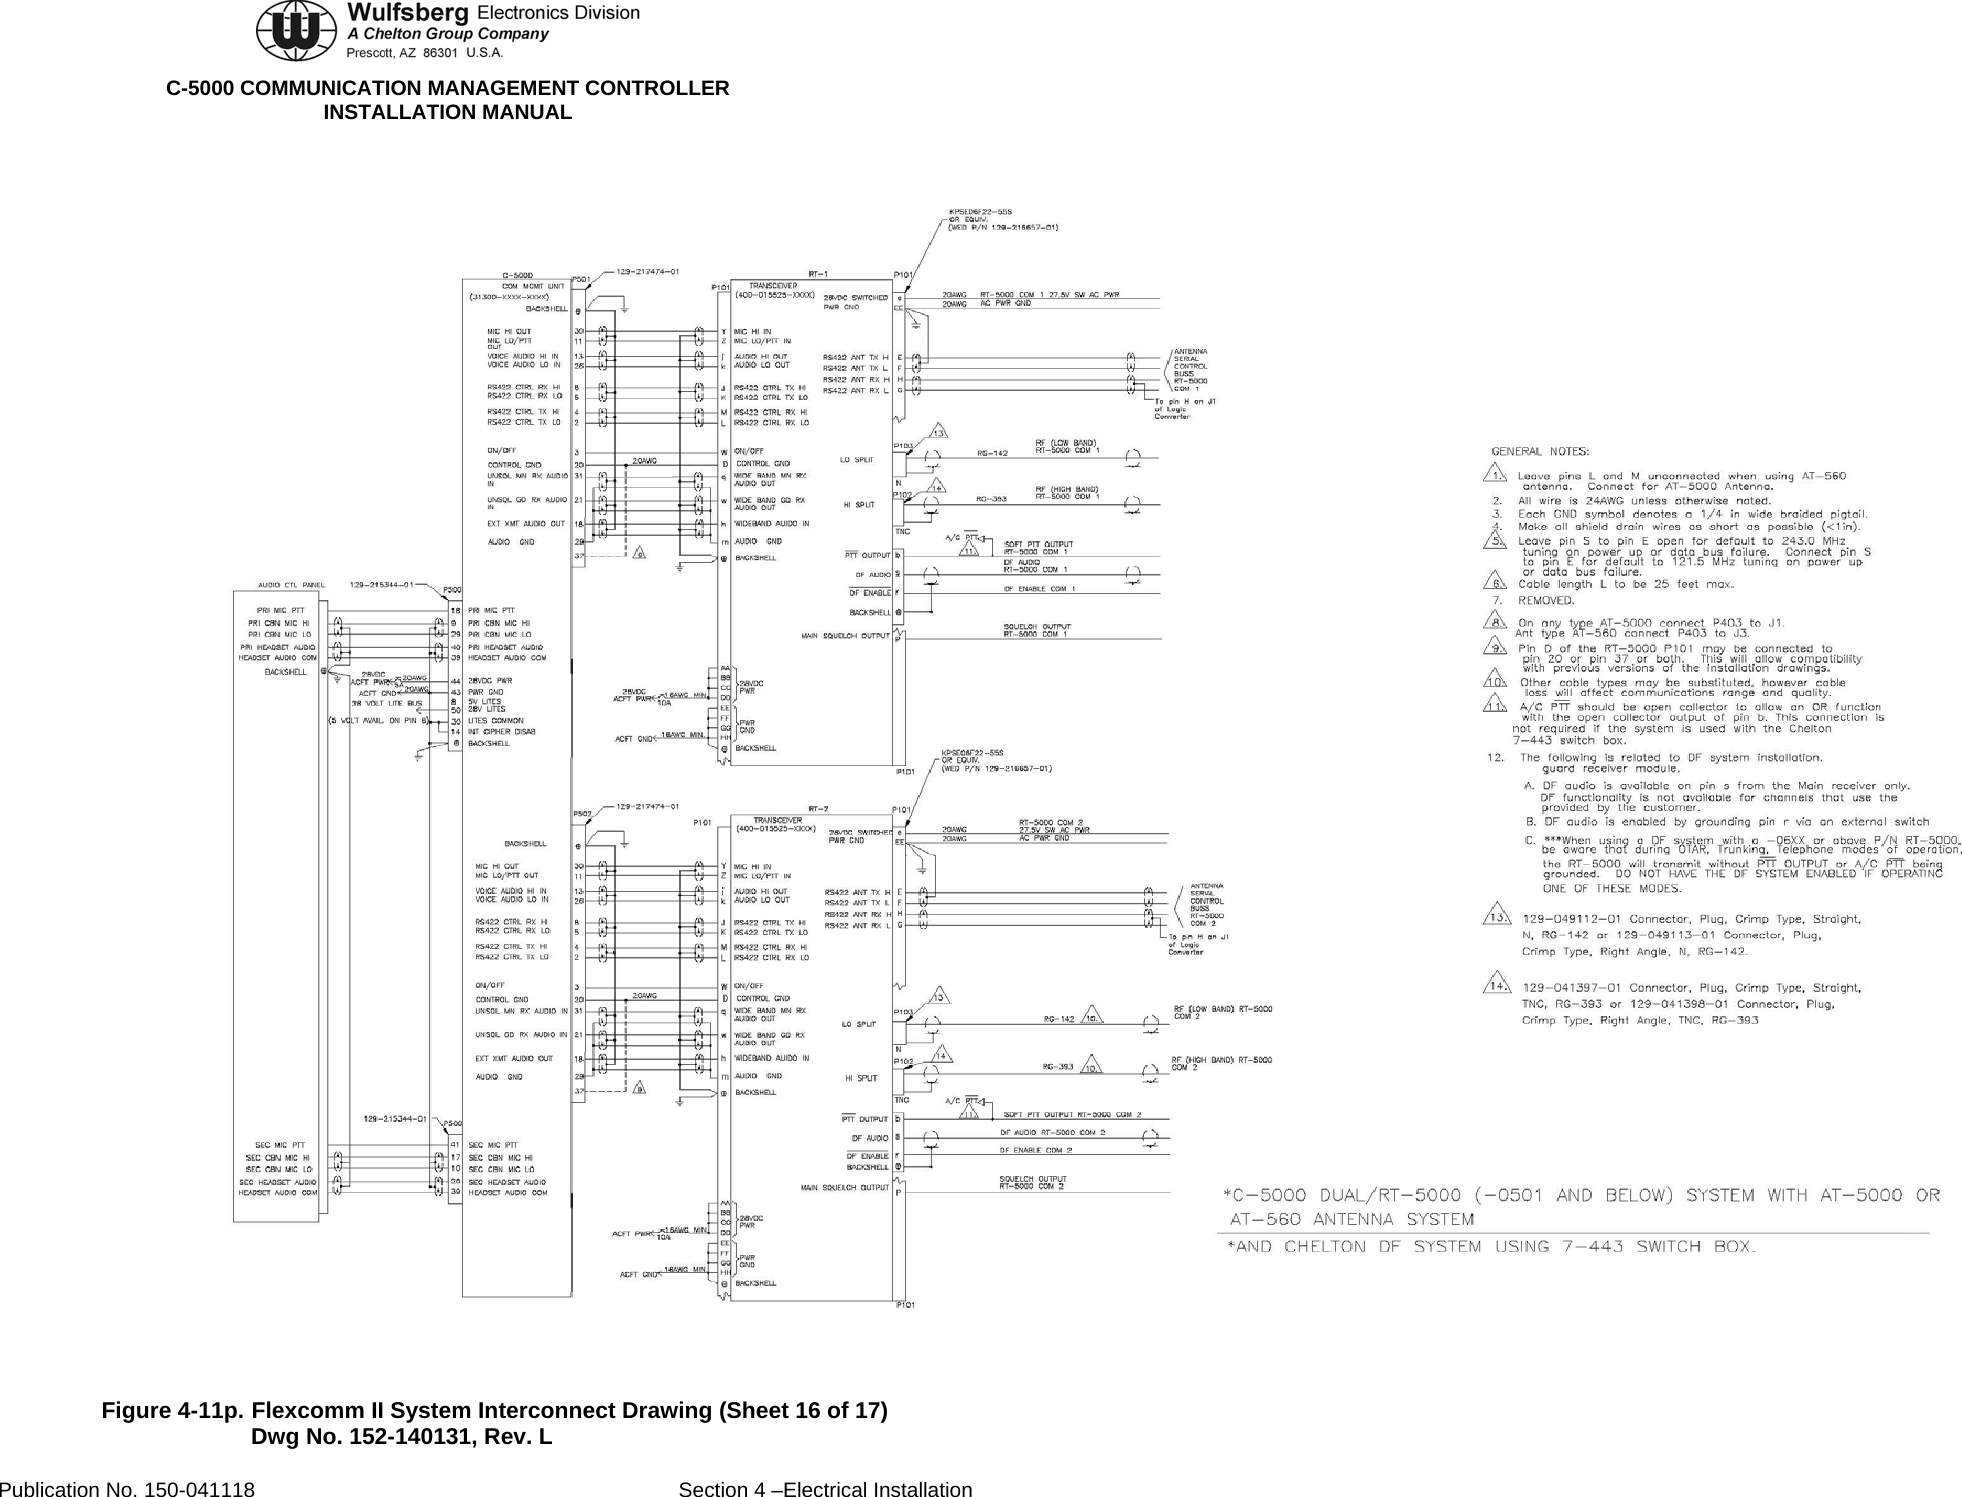  C-5000 COMMUNICATION MANAGEMENT CONTROLLER INSTALLATION MANUAL  Figure 4-11p. Flexcomm II System Interconnect Drawing (Sheet 16 of 17) Dwg No. 152-140131, Rev. L Publication No. 150-041118  Section 4 –Electrical Installation 